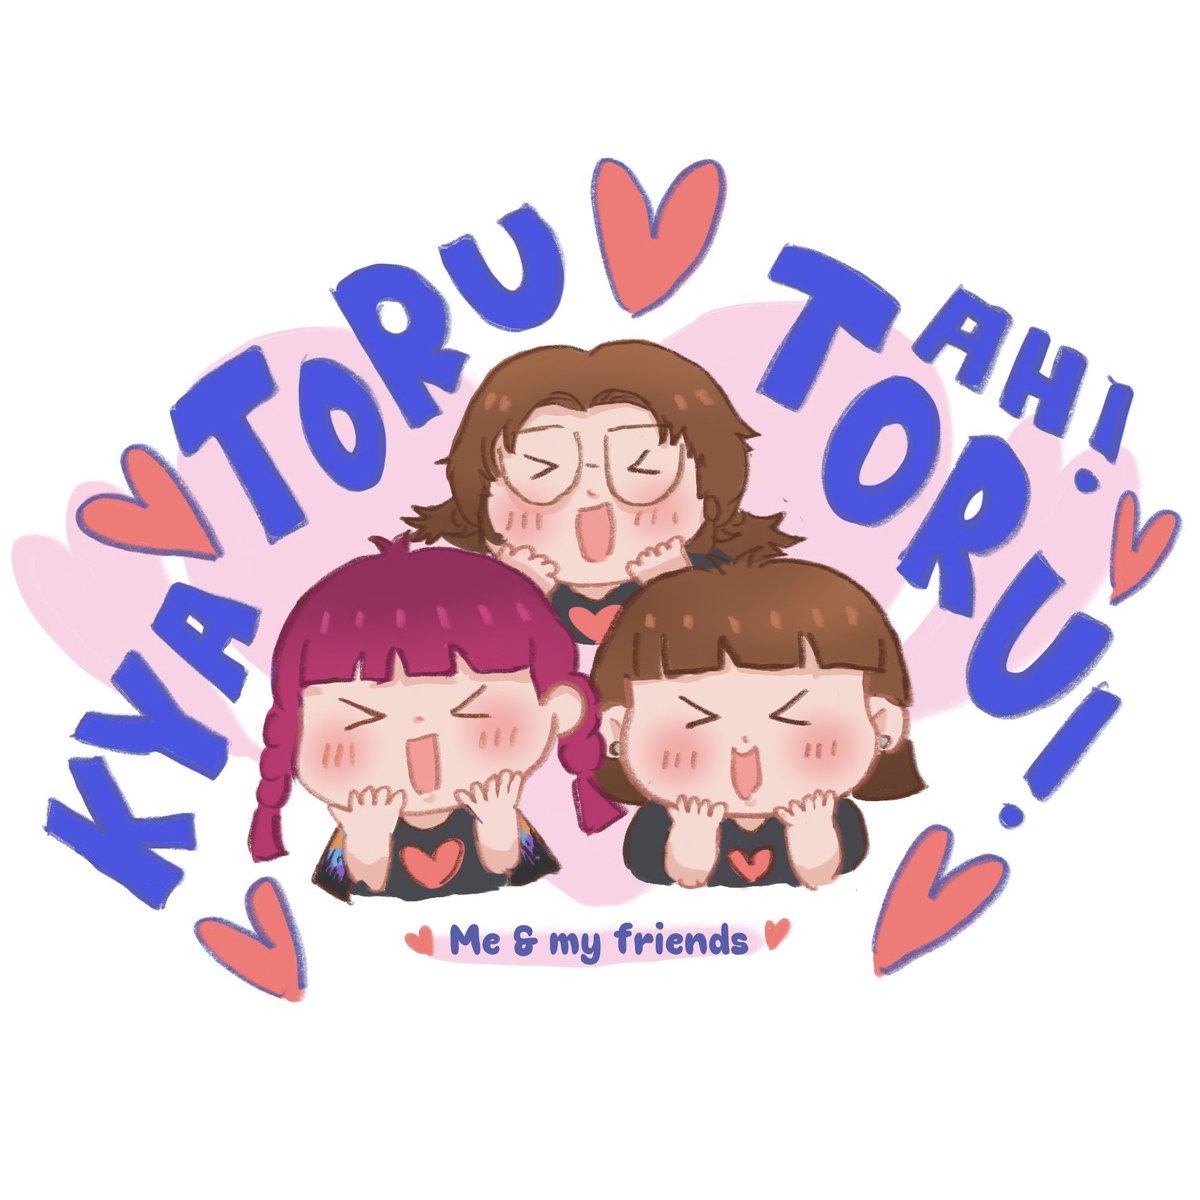 Toru stood in front of us throughout the entire concert and this was us all the time!!! 🤣💕

#ONEOKROCK #ONEOKROCKinKL #OORinKL #LuxuryDisease #ワクワク #oneokrockfanart #Toru